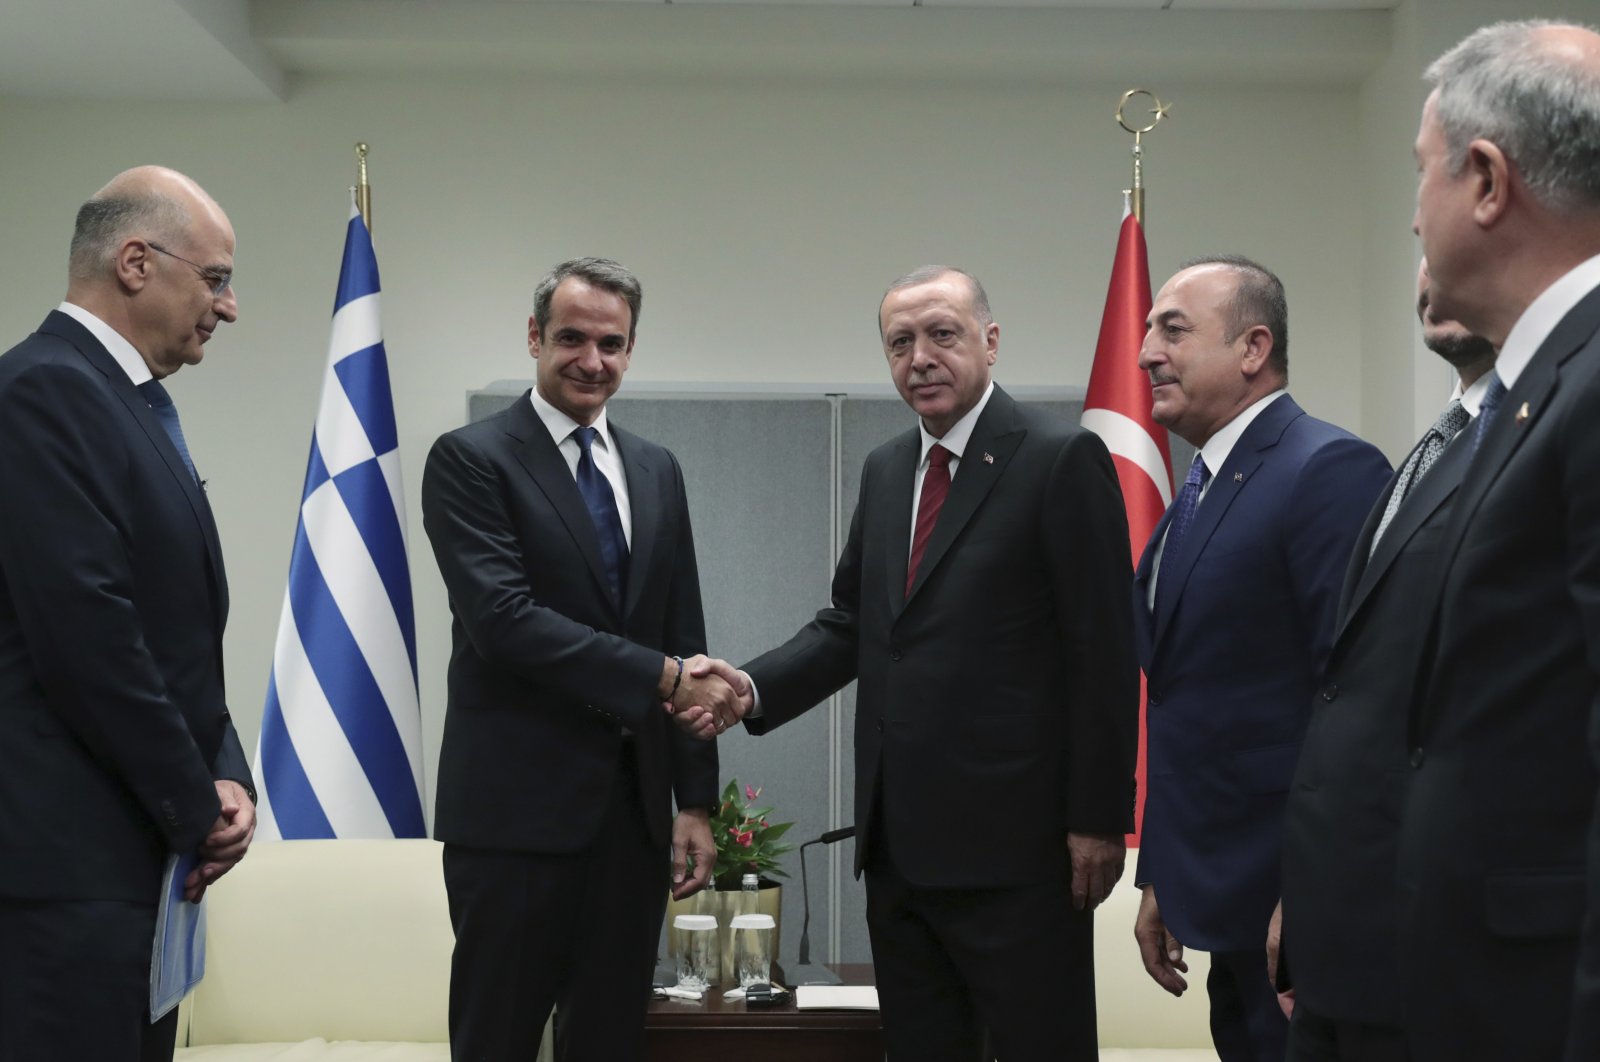 President Recep Tayyip Erdoğan (center R) shakes hands with Greek Prime Minister Kyriakos Mitsotakis (center L) prior to their meeting on the sidelines of the 74th session of the United Nations General Assembly at U.N. headquarters, New York, U.S., Sept. 25, 2019. (Presidential Press Service via AP)